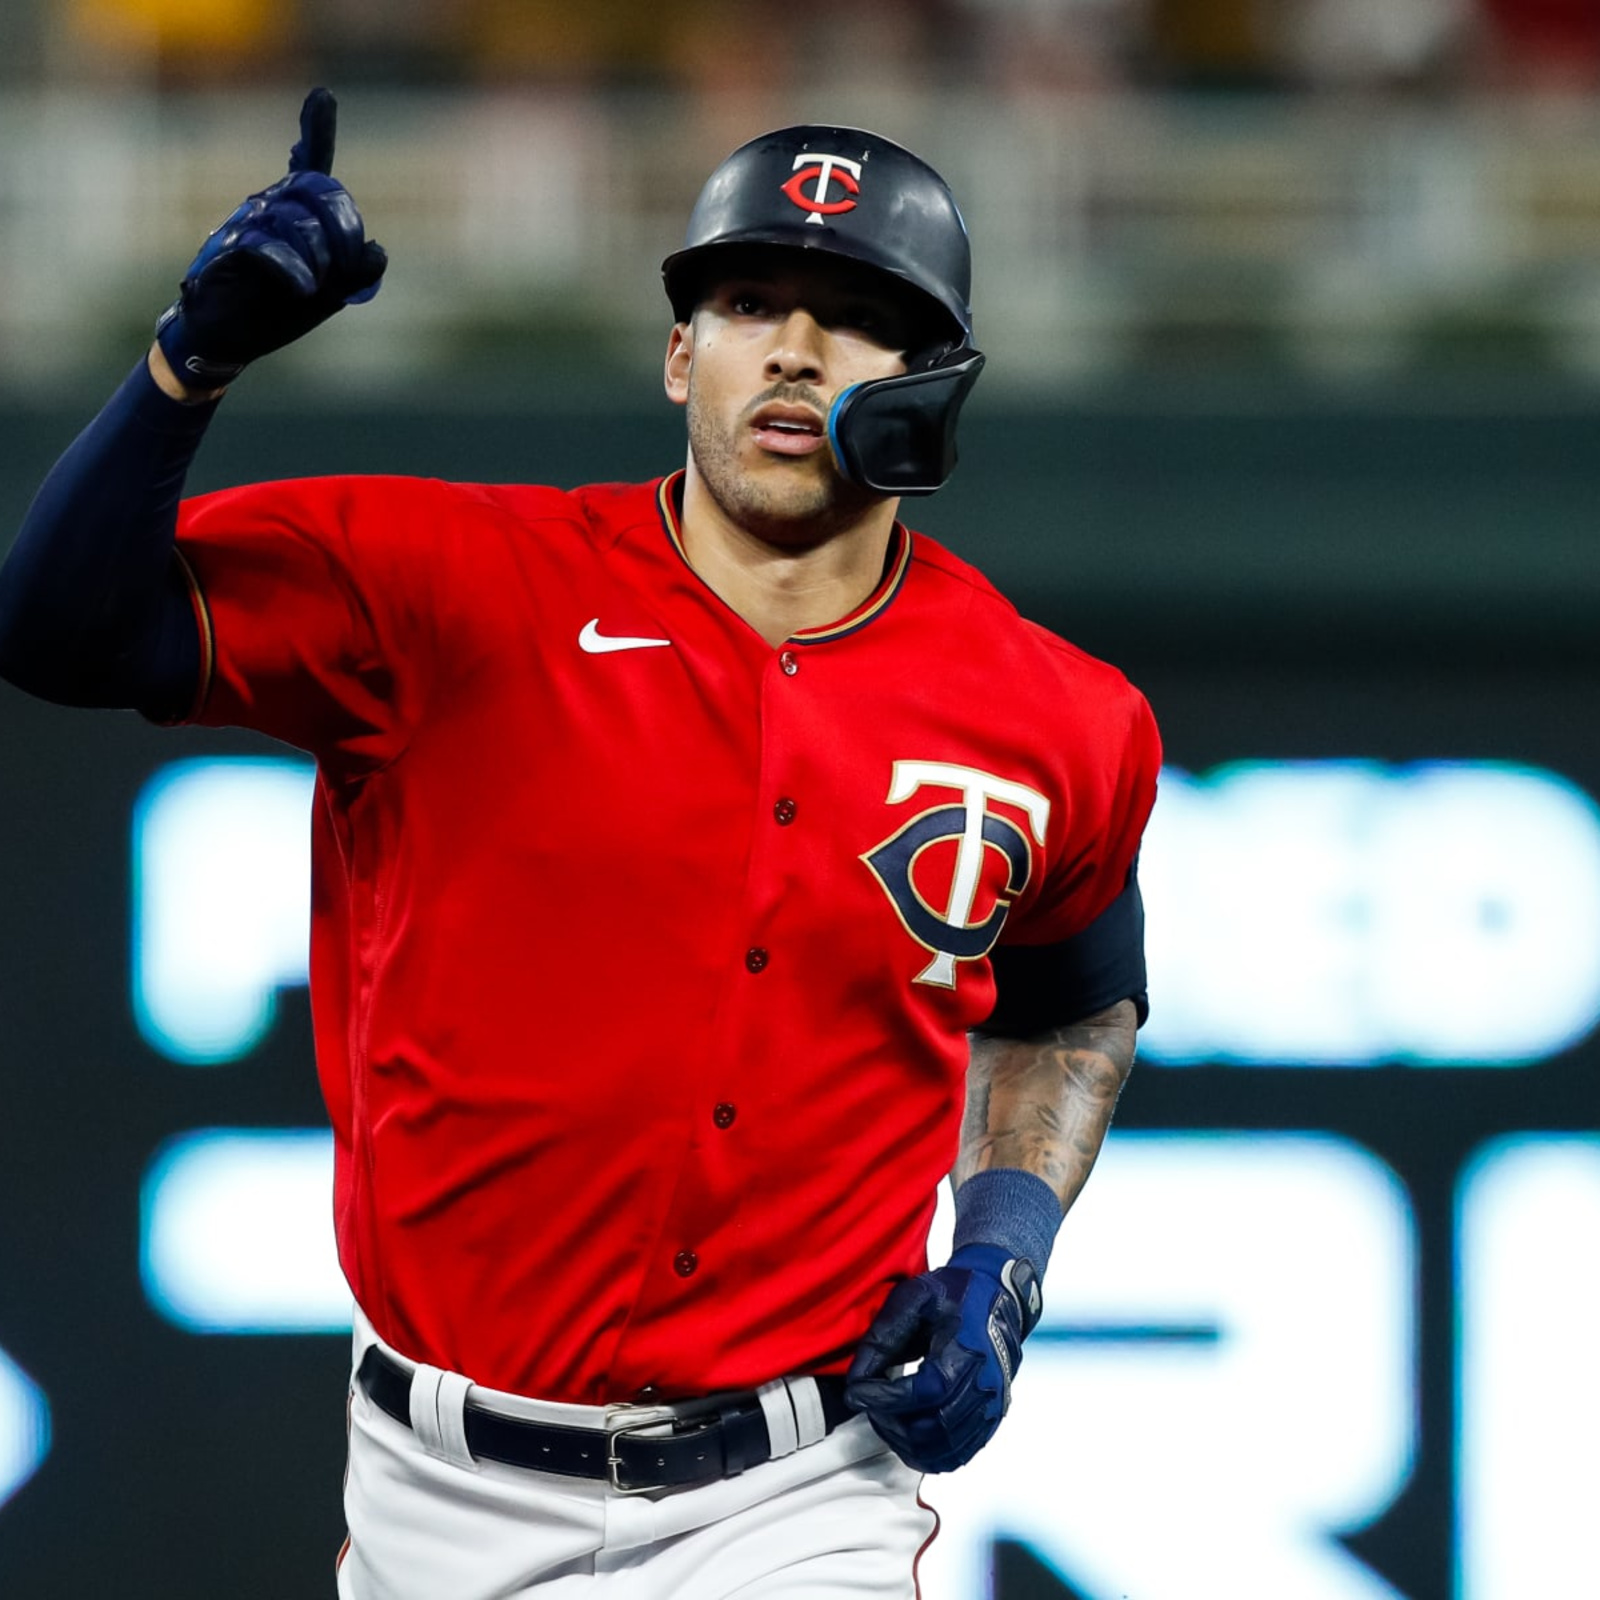 STUNNER: Carlos Correa Agrees to Terms with Minnesota Twins